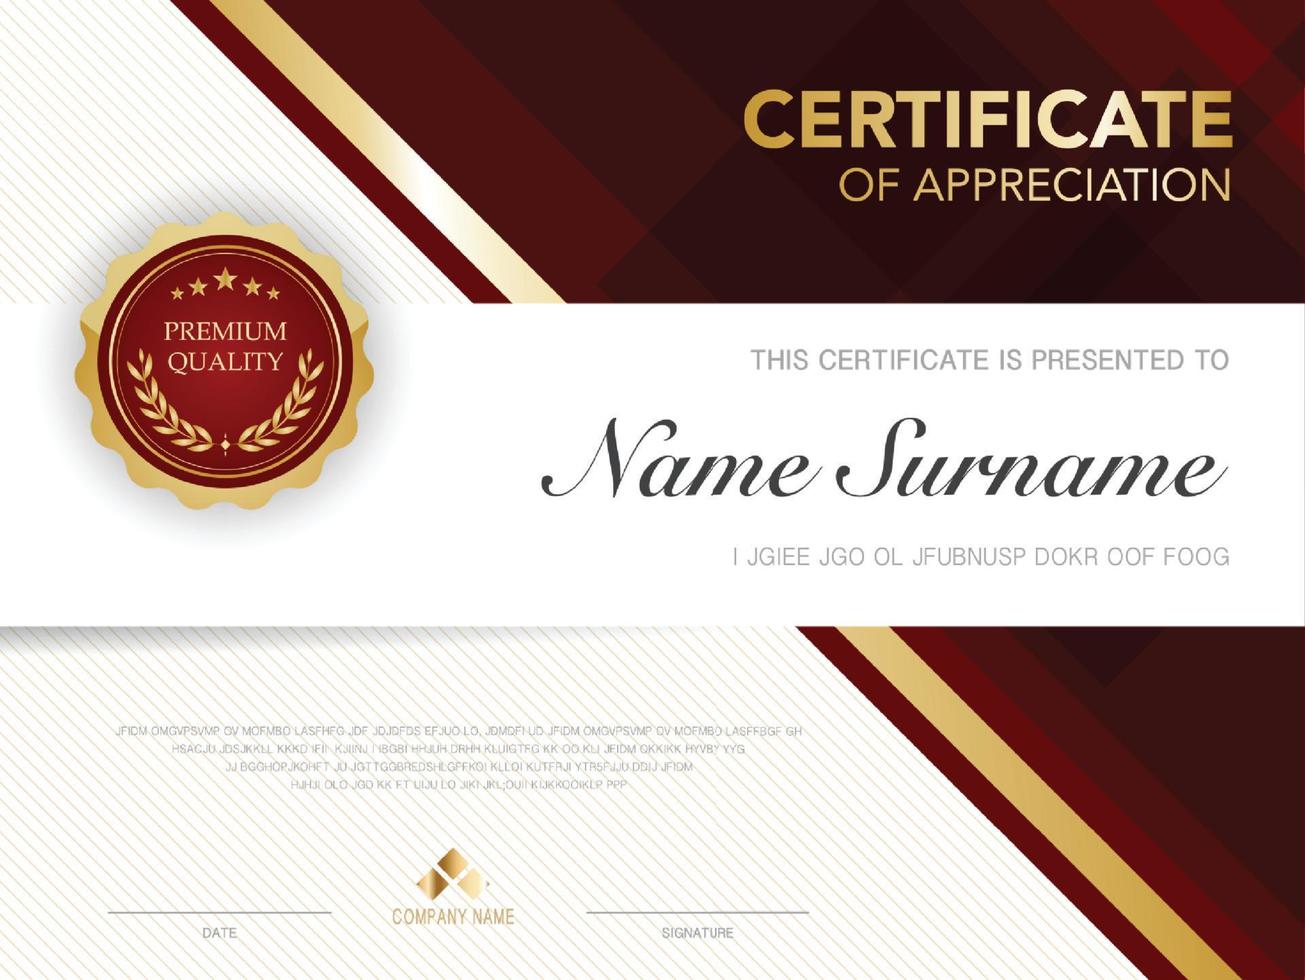 diploma certificate template red and gold color with luxury and modern style vector image.